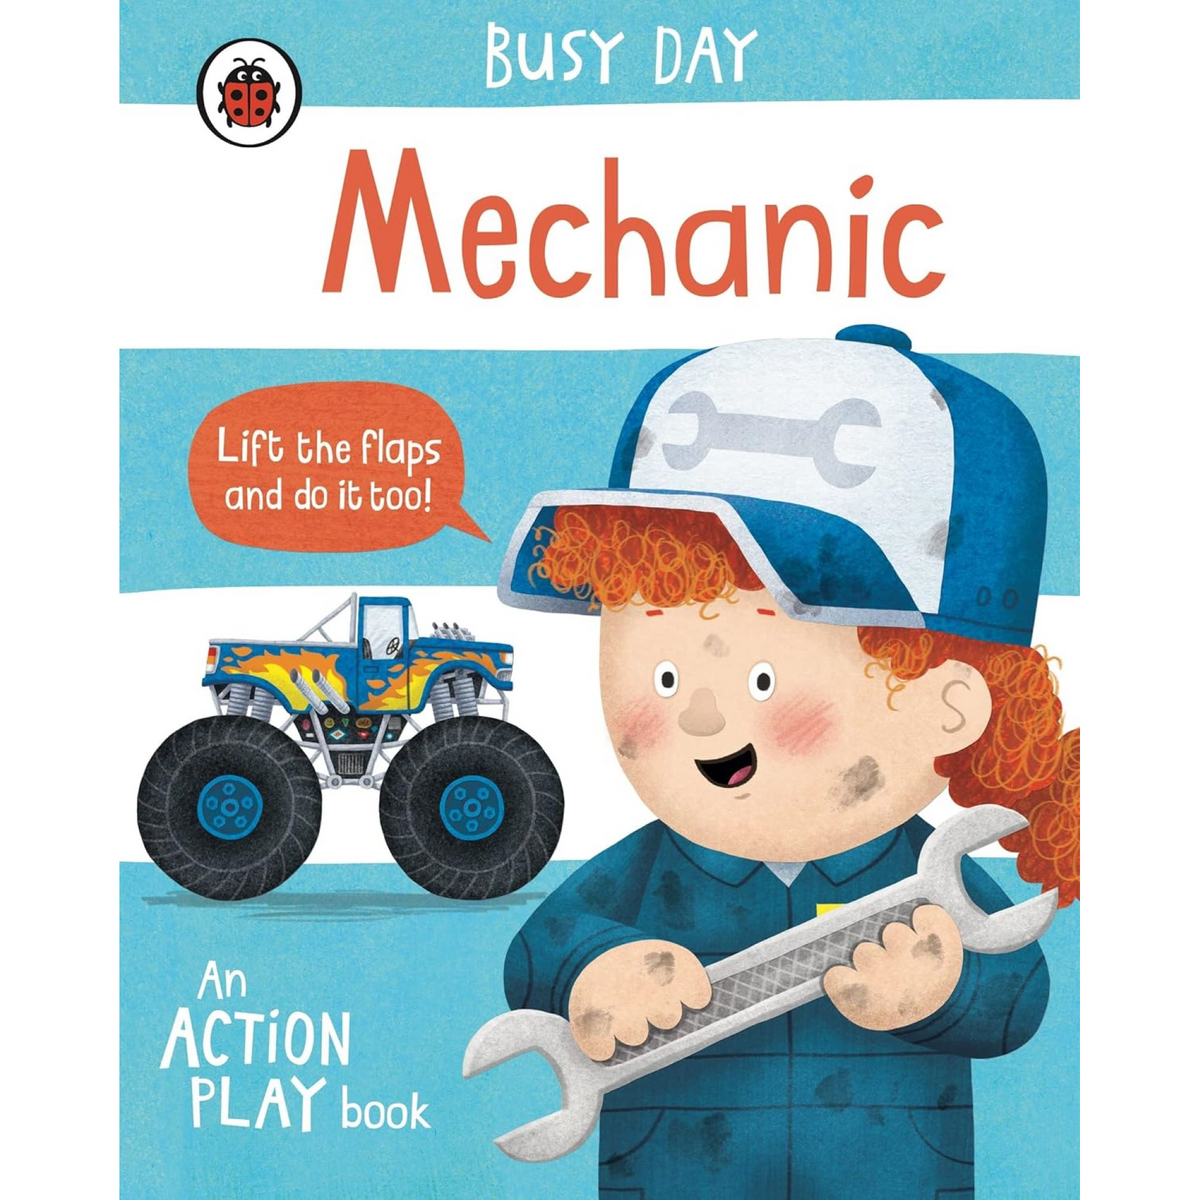 Busy Day: Mechanic: An action play book